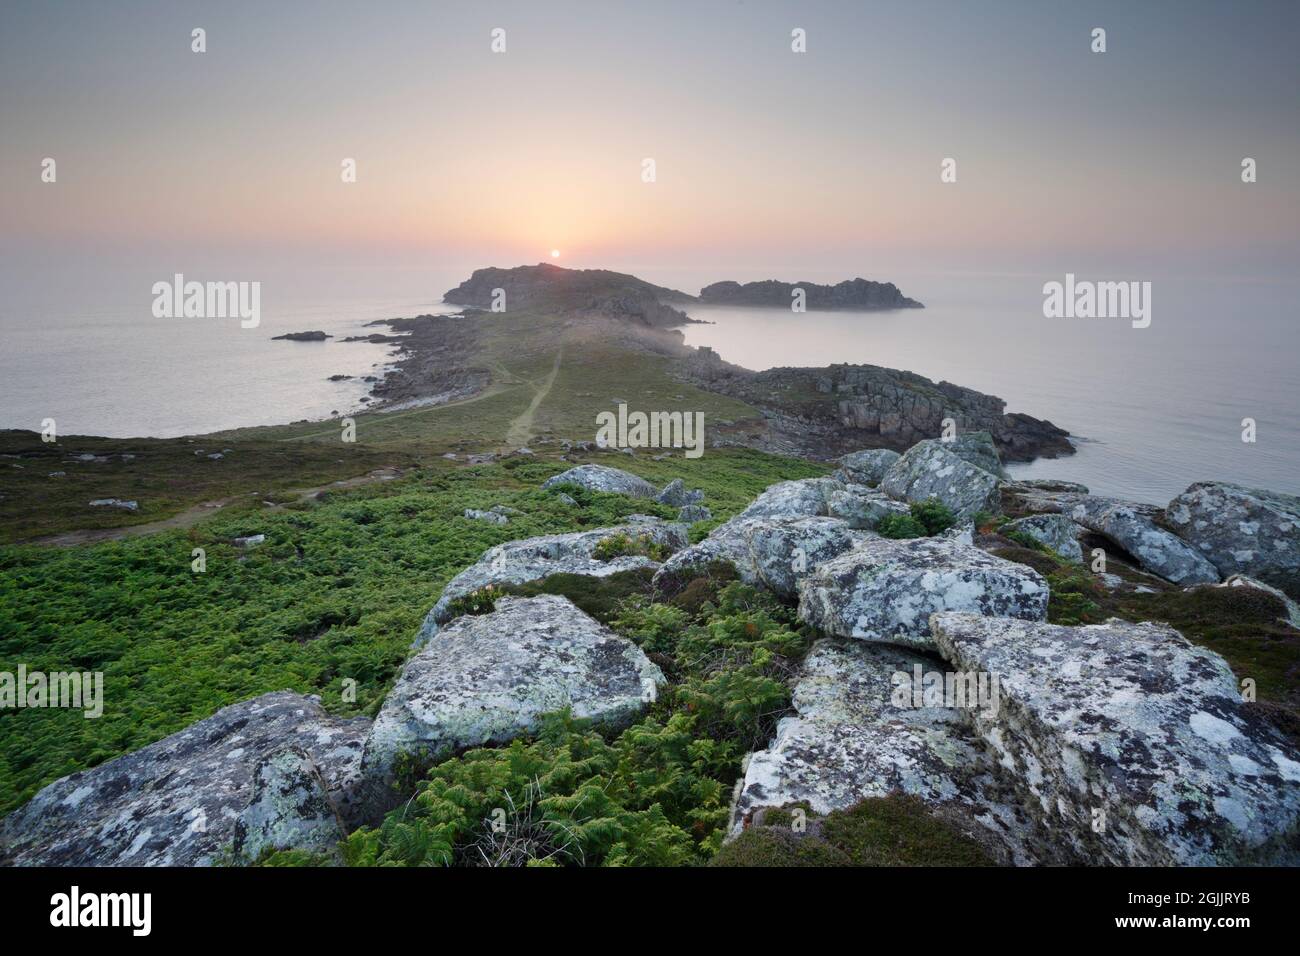 Sunset at Shipmans Head. Bryher. Isles of Scilly. Cornwall, UK. Stock Photo